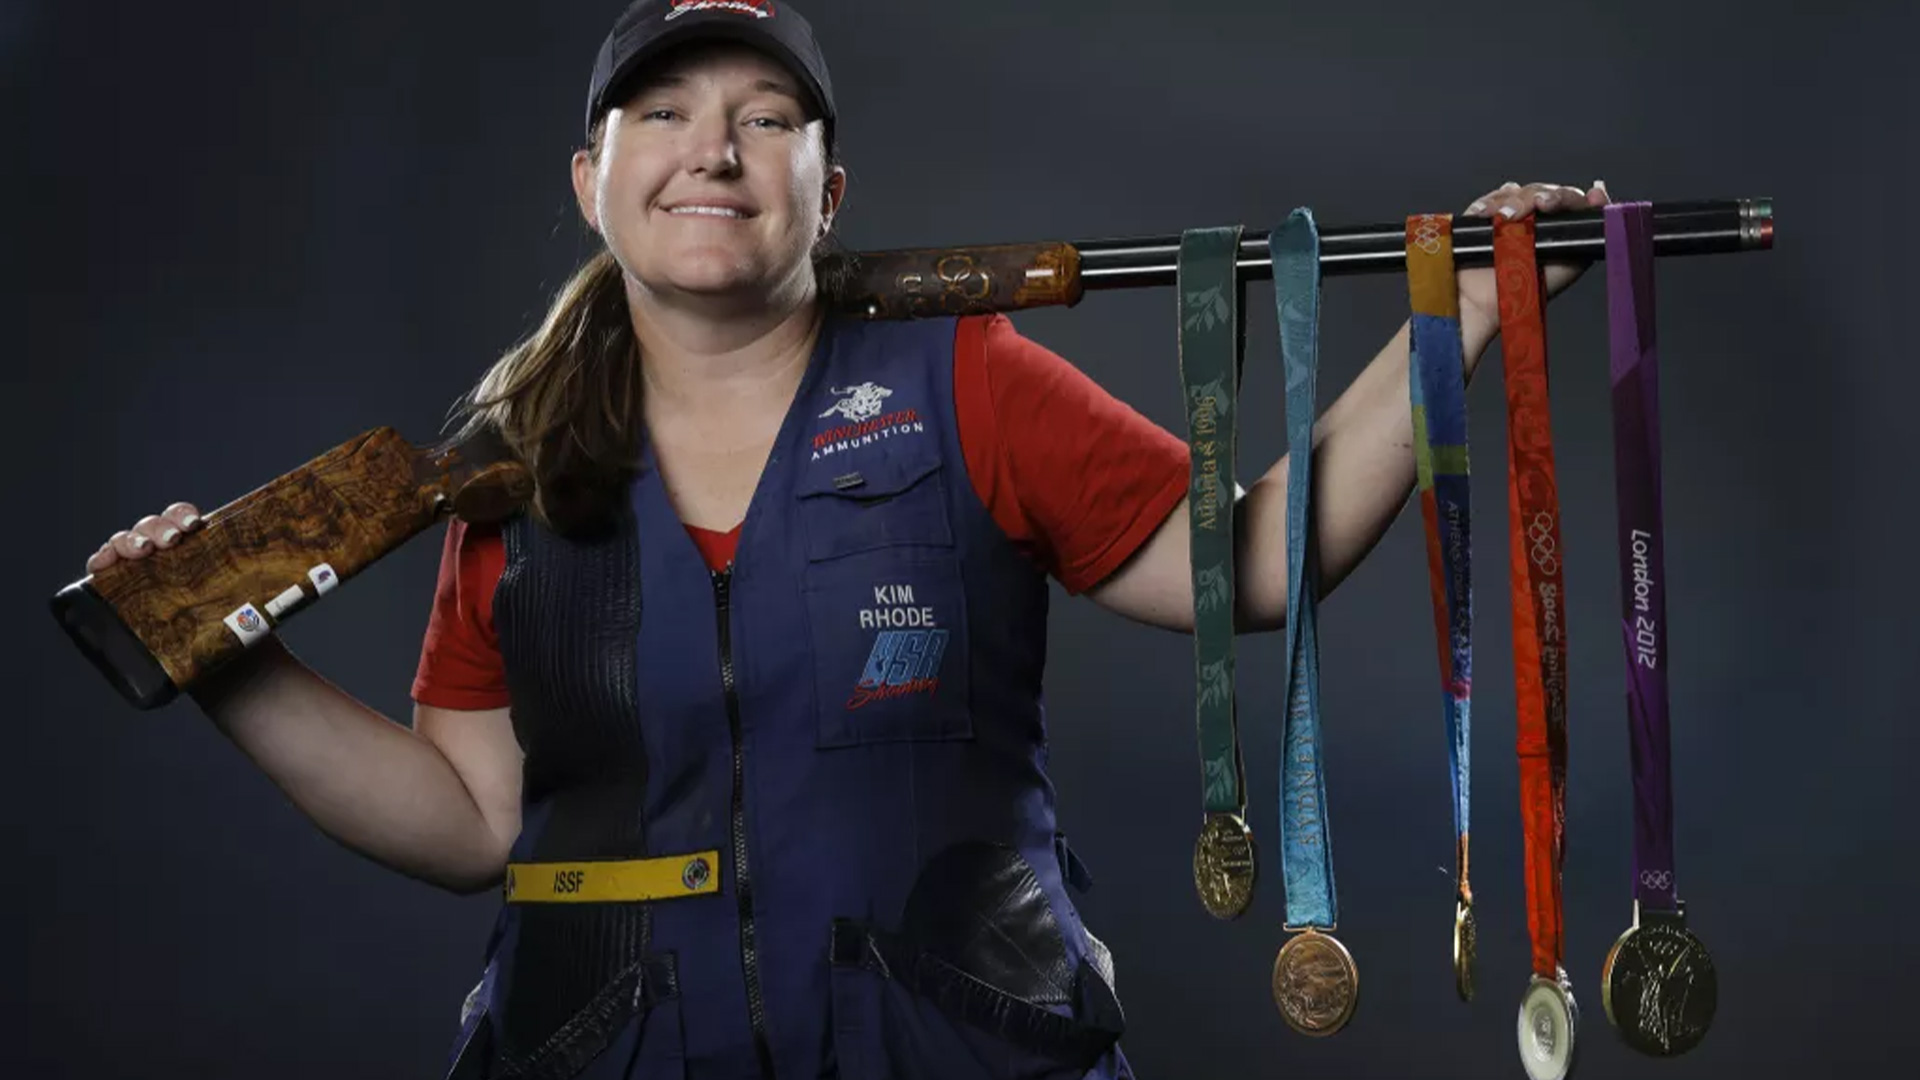 Kim Rhode with medals